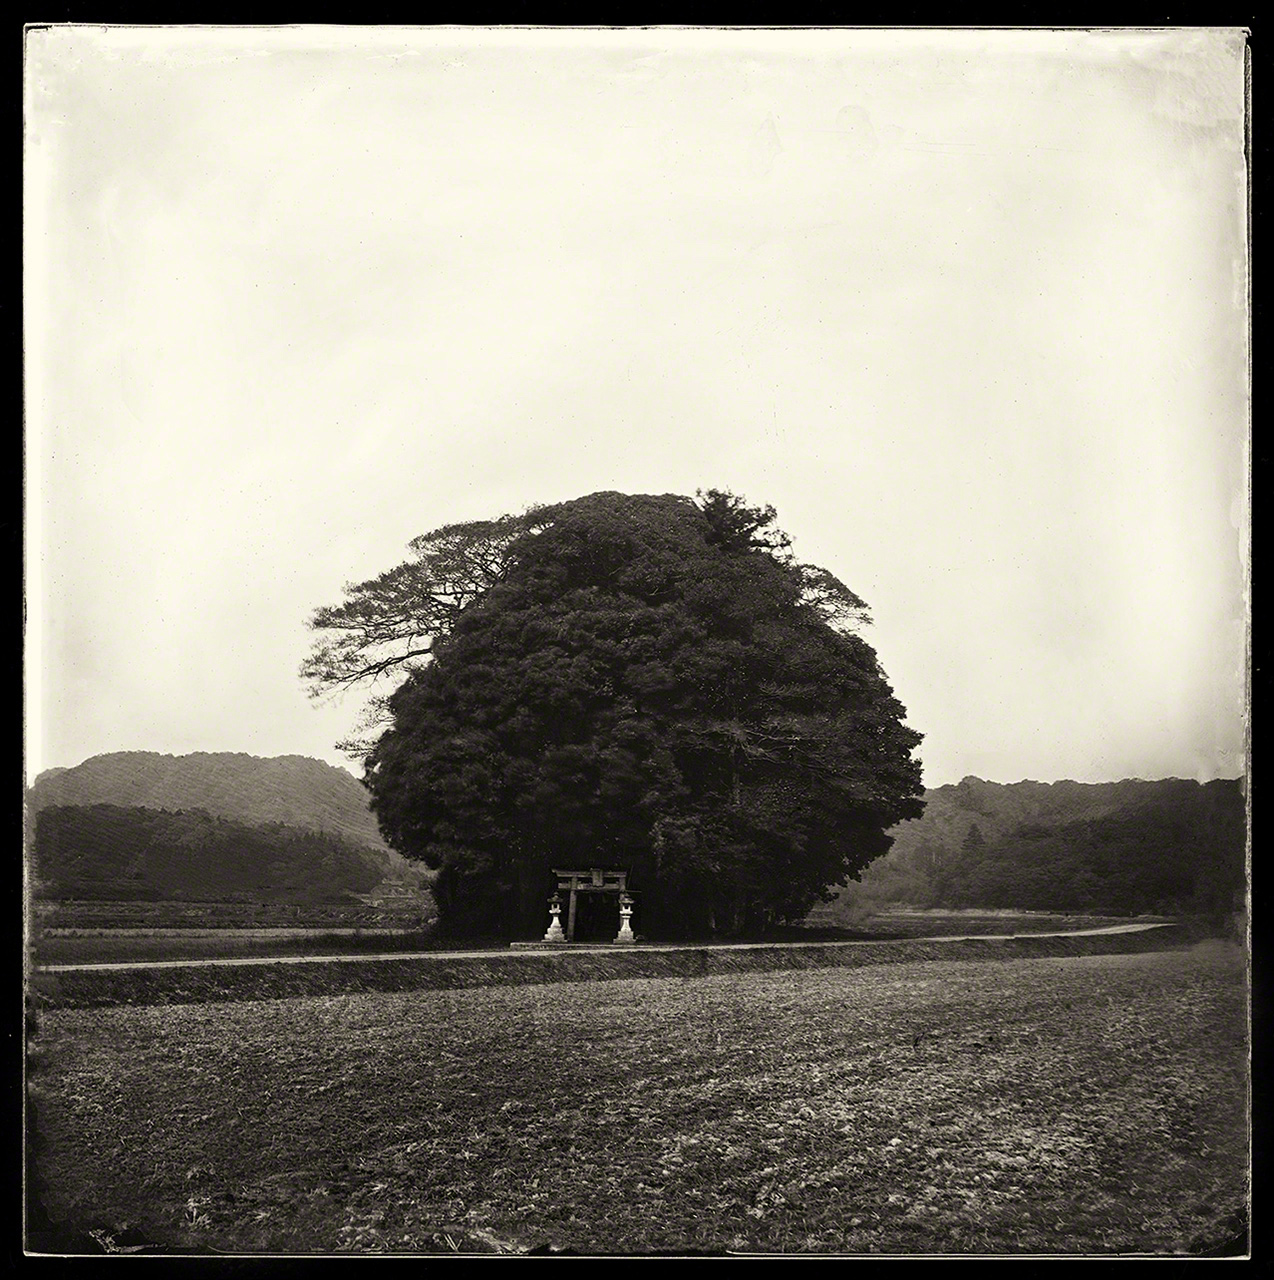 An ancient burial mound in a rice field. According to local legend, the voices of spirits can be heard in the trees.